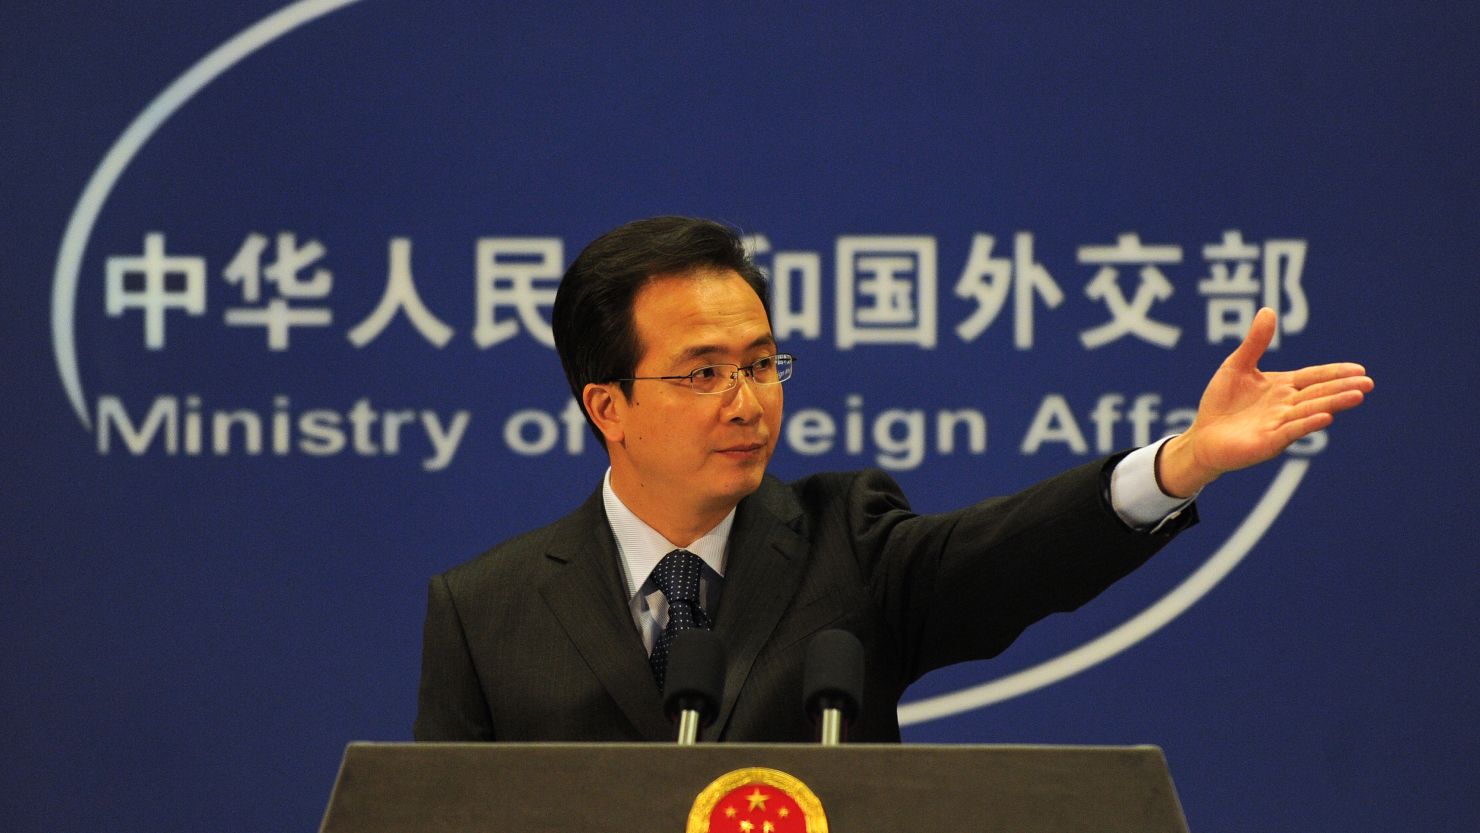 China's Ministry of Foreign Affairs spokesman Hong Lei gestures at a press briefing in Beijing on November 30, 2010. 